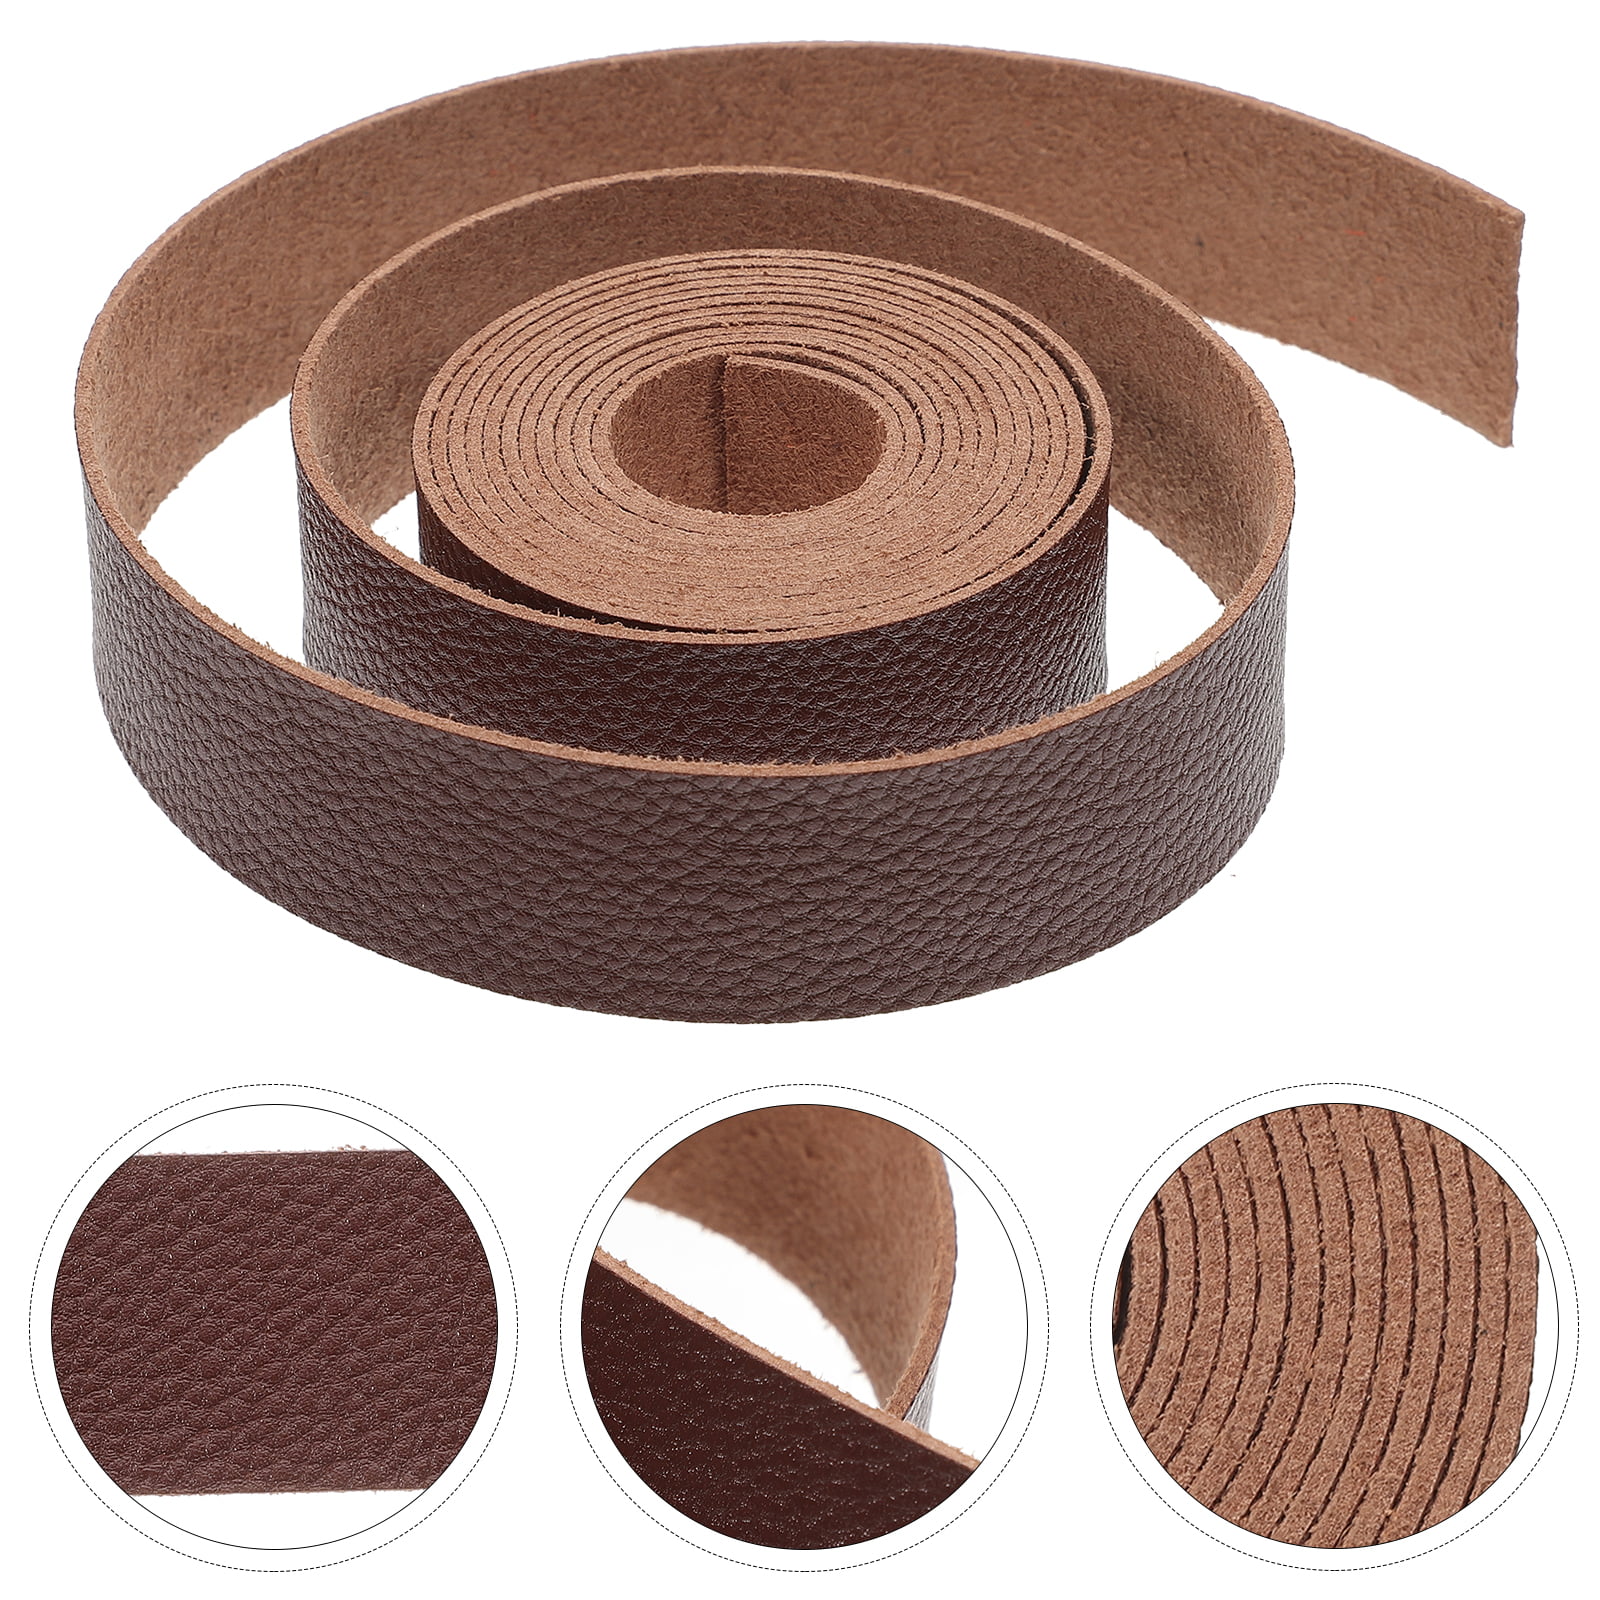 Fan&Ran Genuine Leather Strip 1/4 inch Wide 72 Inches Long for DIY Craft Projects, 1.8-2mm Thick, Bourbon Brown